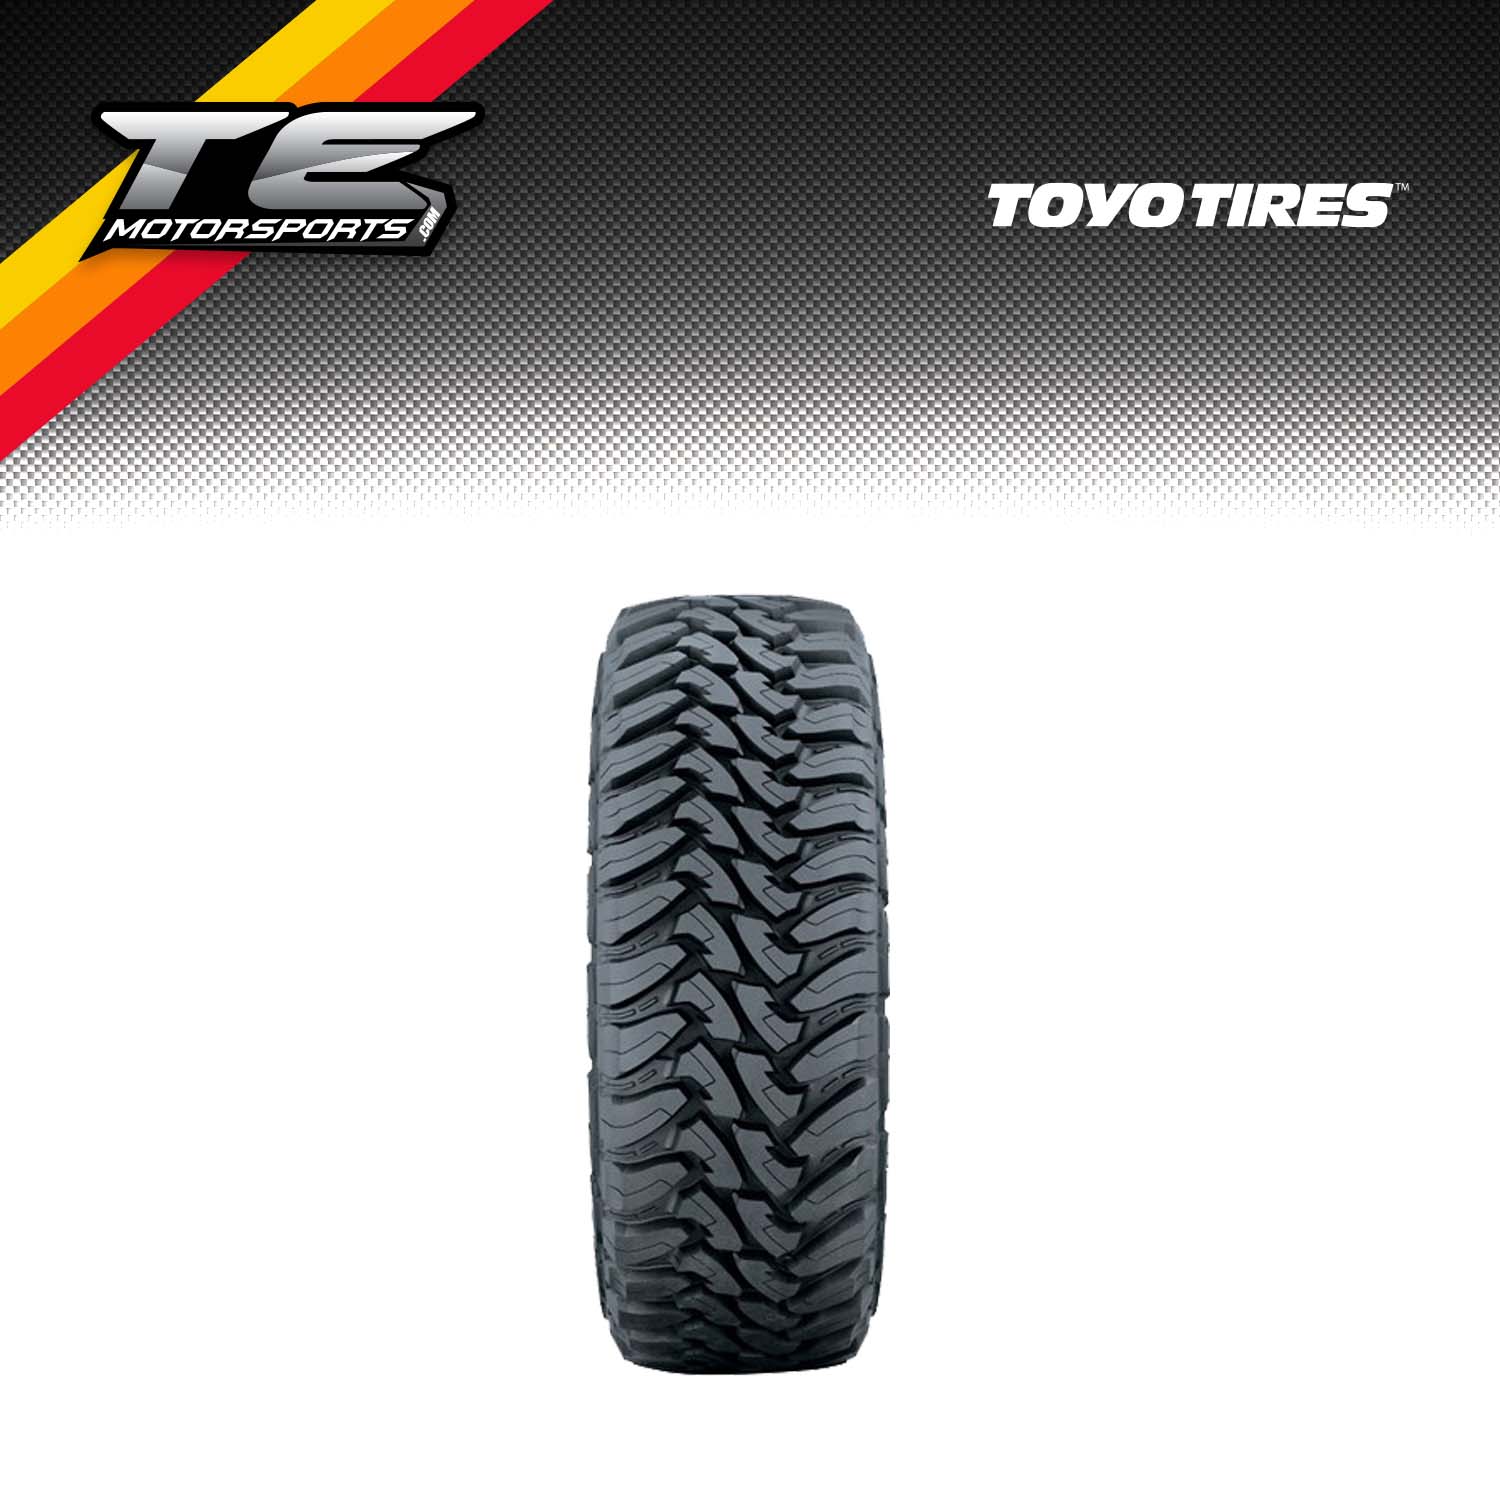 Toyo Tires 35x12.50R20LT Tire, Open Country M/T - 360240